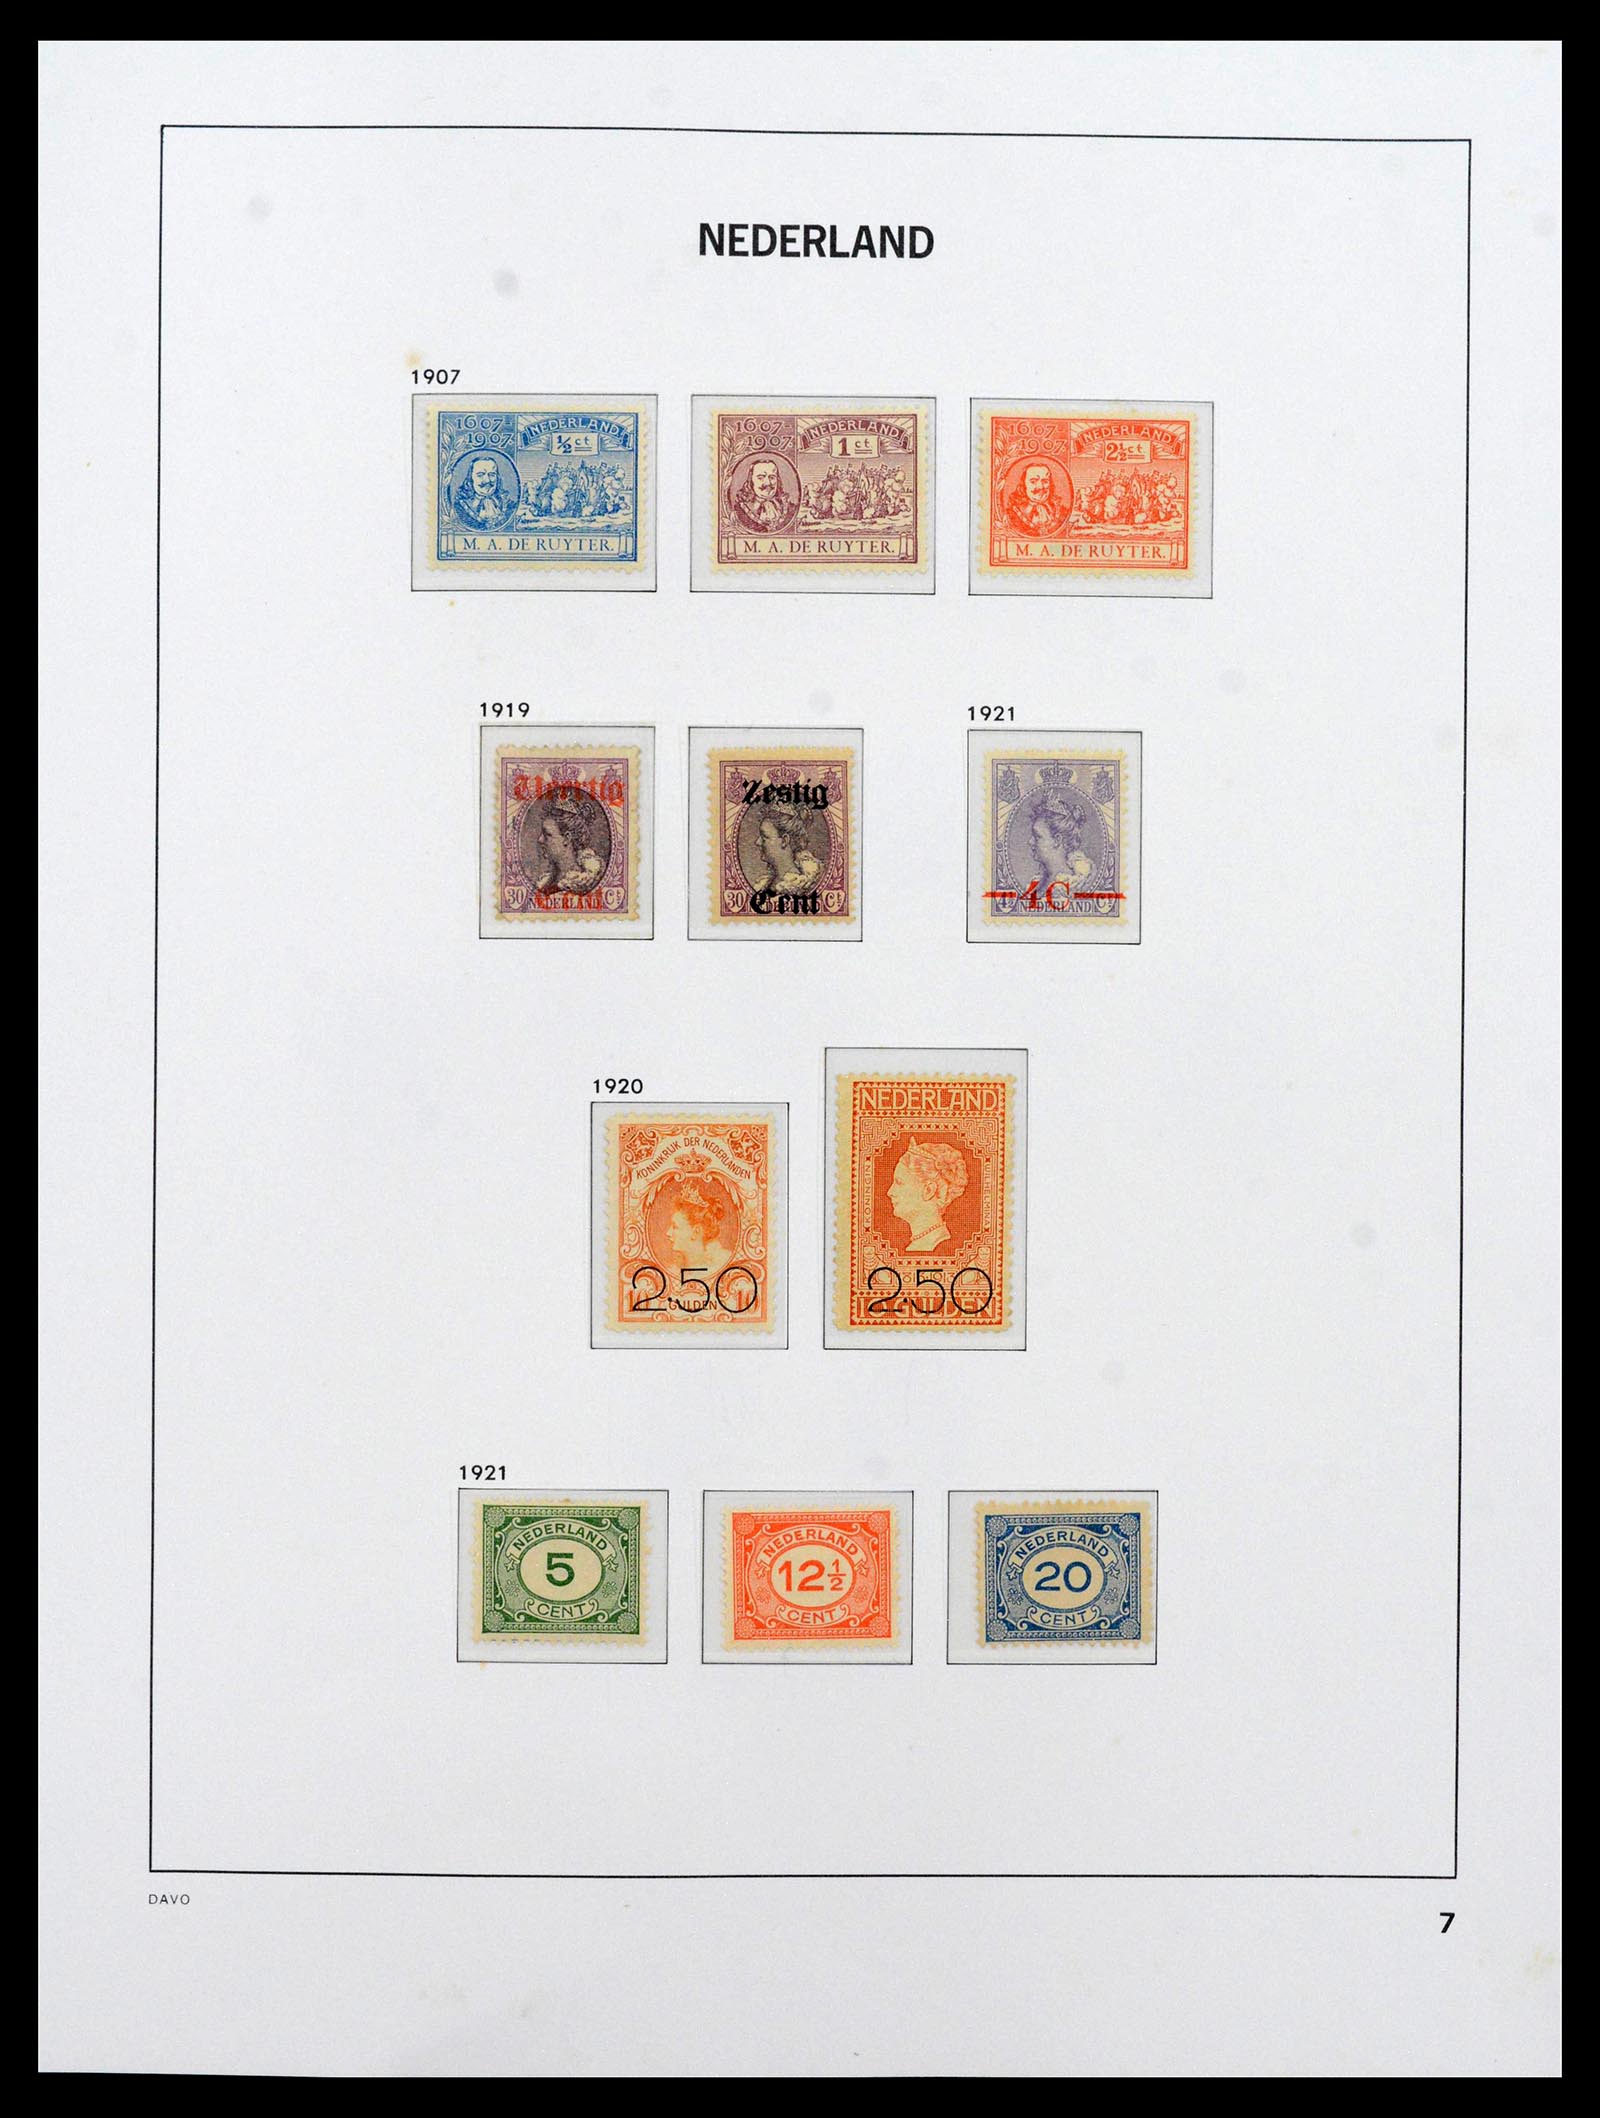 39035 0007 - Stamp collection 39035 Netherlands 1852-1968.